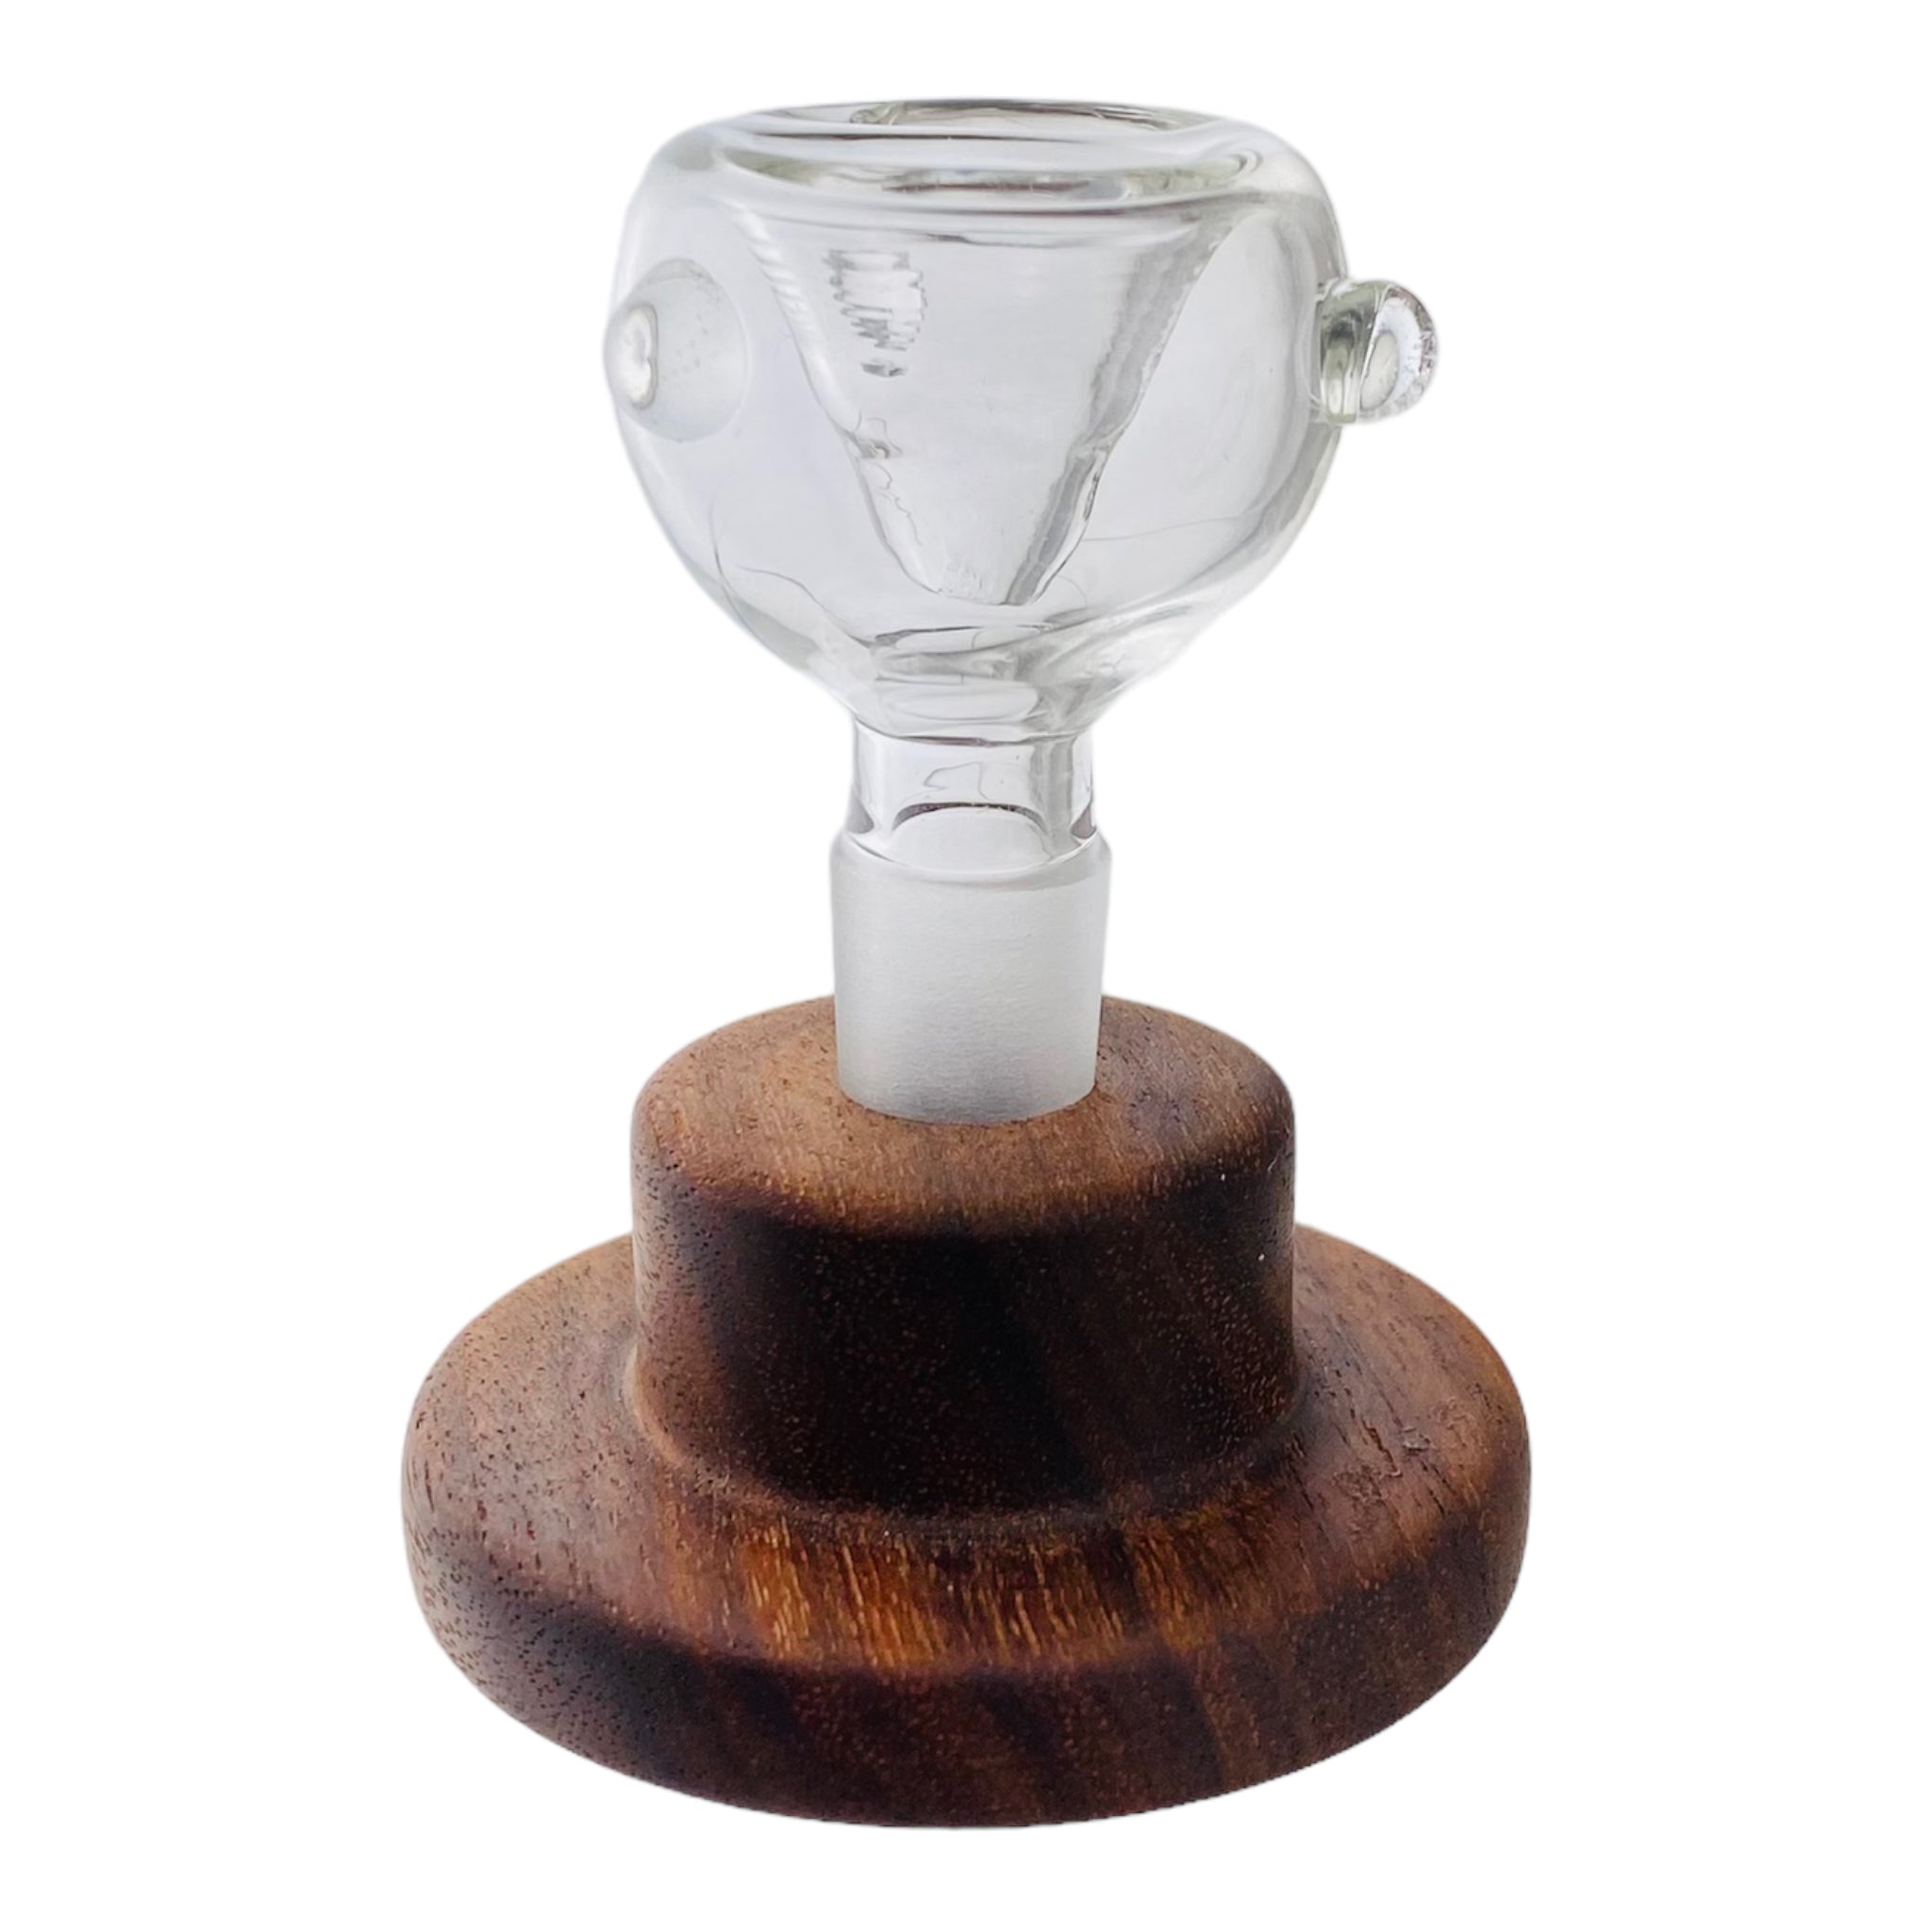 Round Single Hole Wood Display Stand Holder For 14mm Bong Bowl Pieces Or Quartz Bangers - Black Walnut Hat